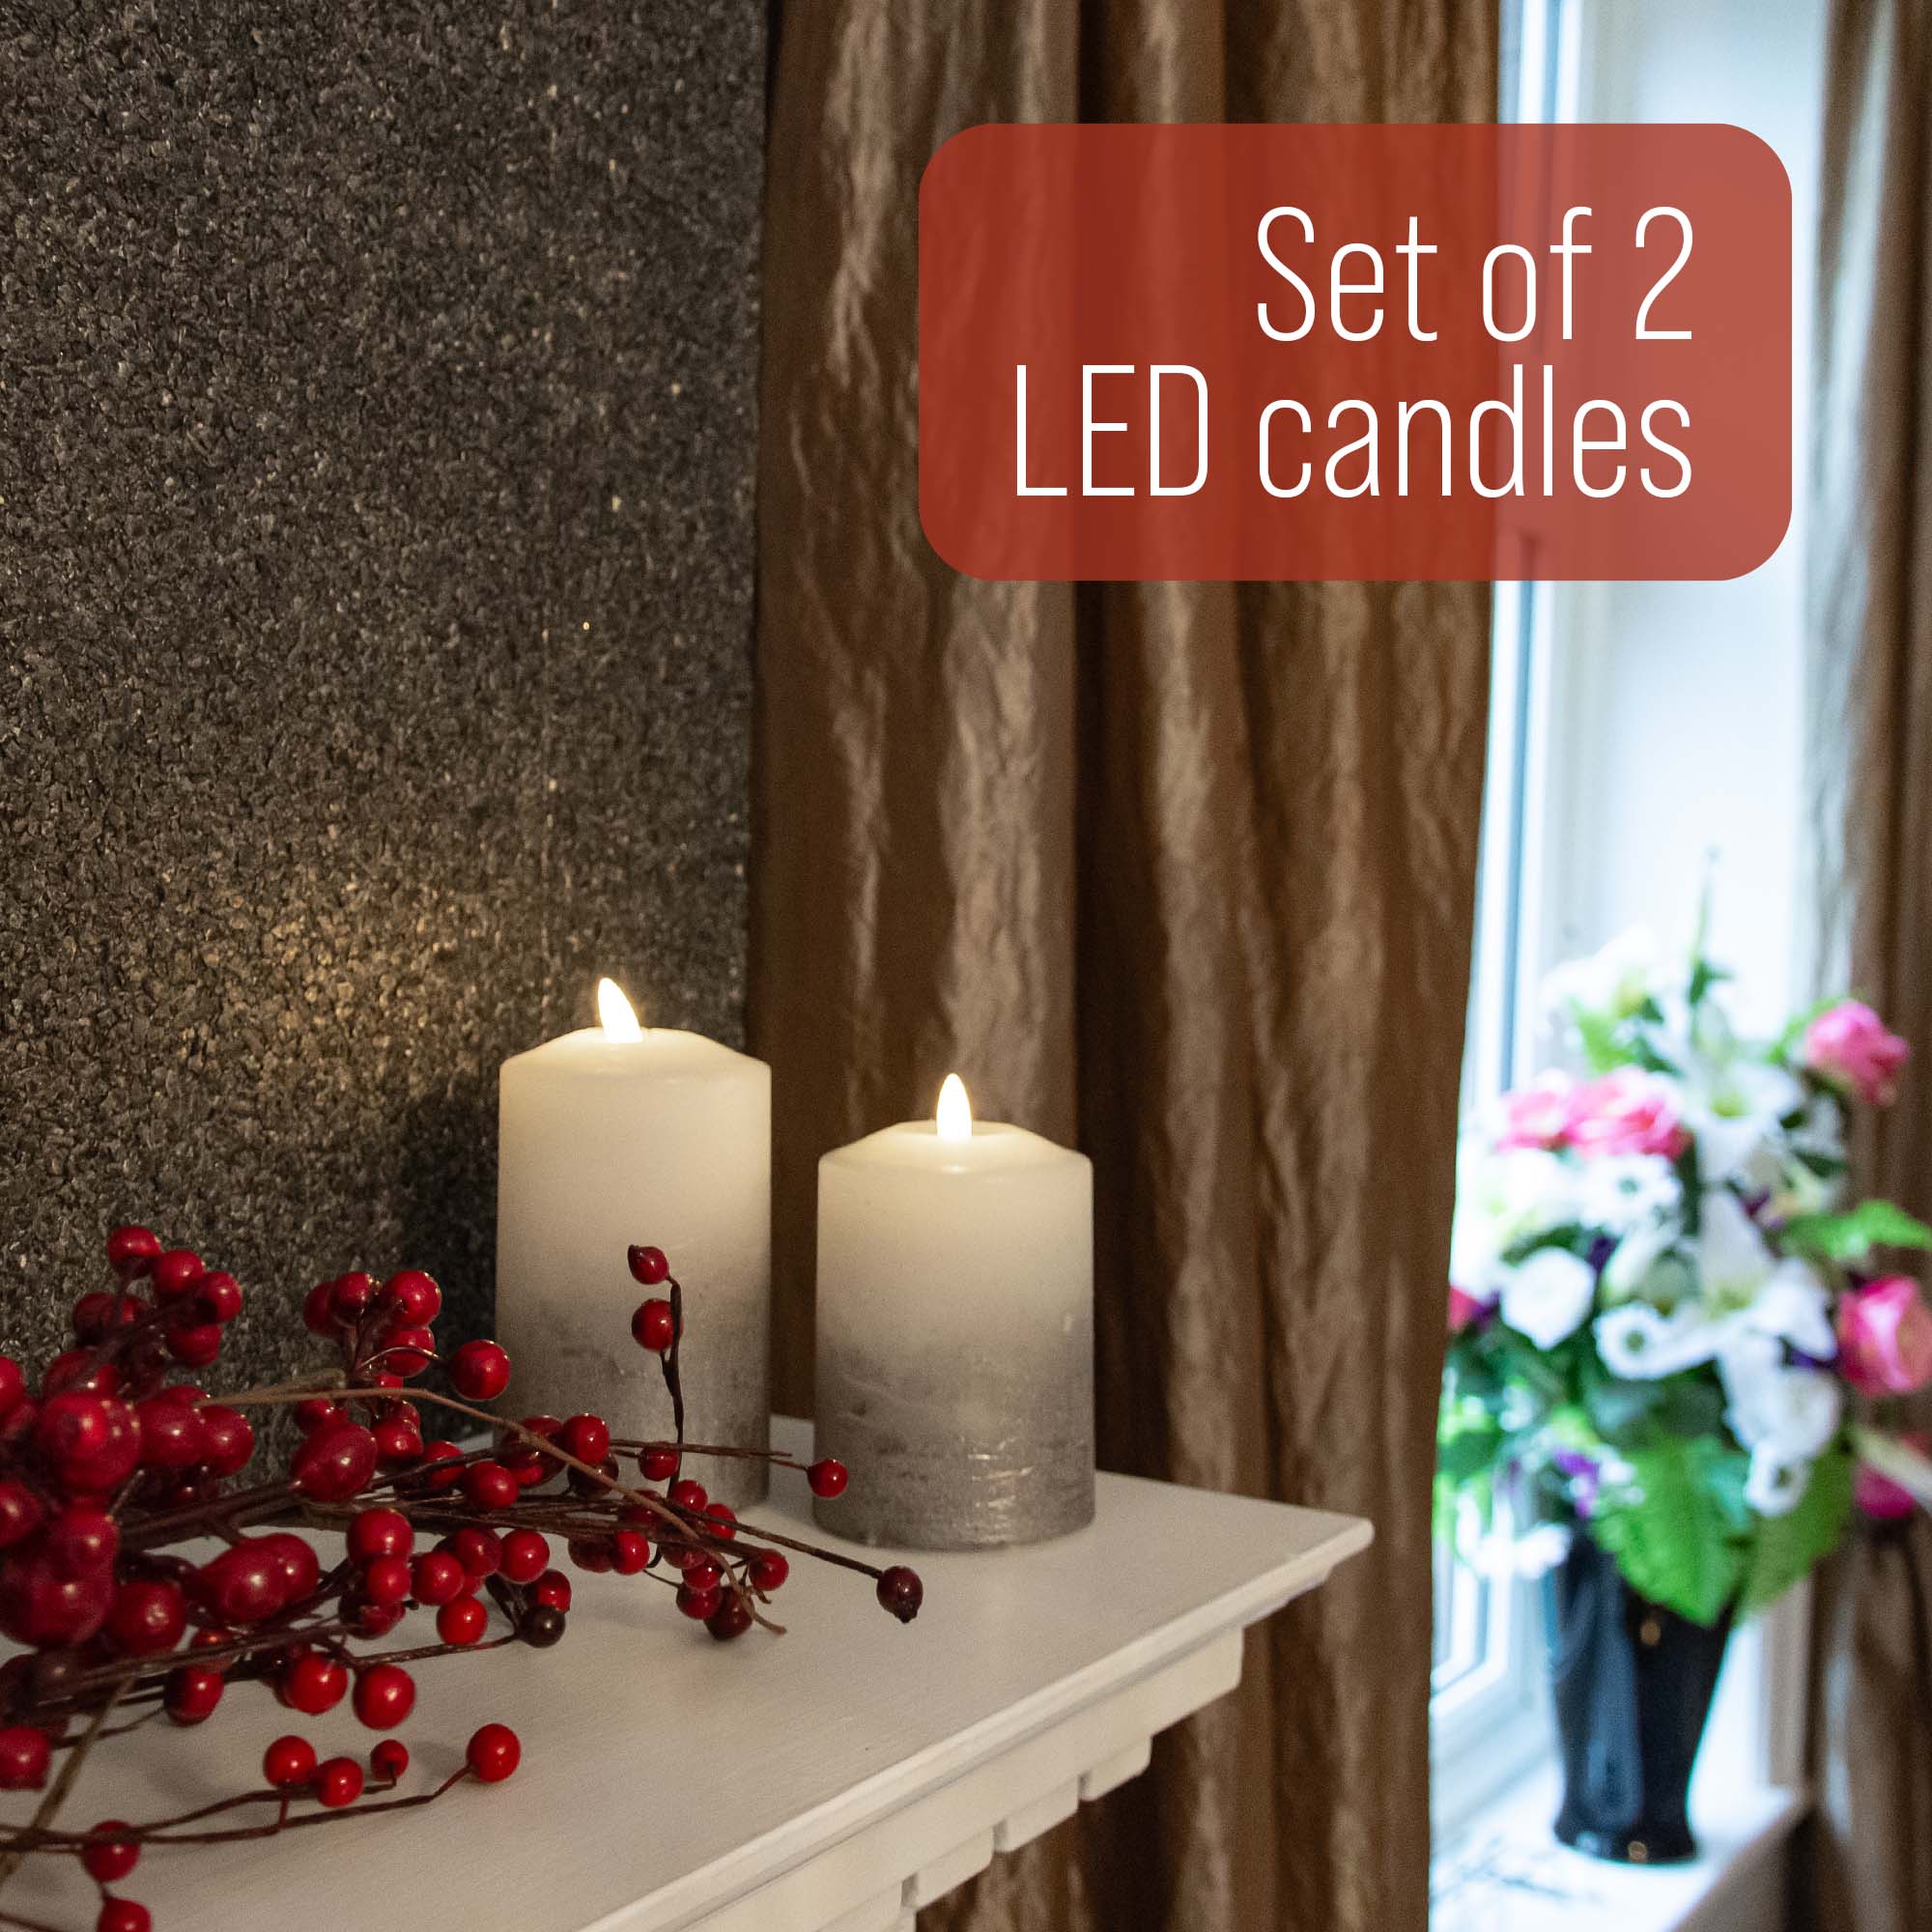 Flameless LED Candles (Ombre) with remote control (Set of 2) - DSL